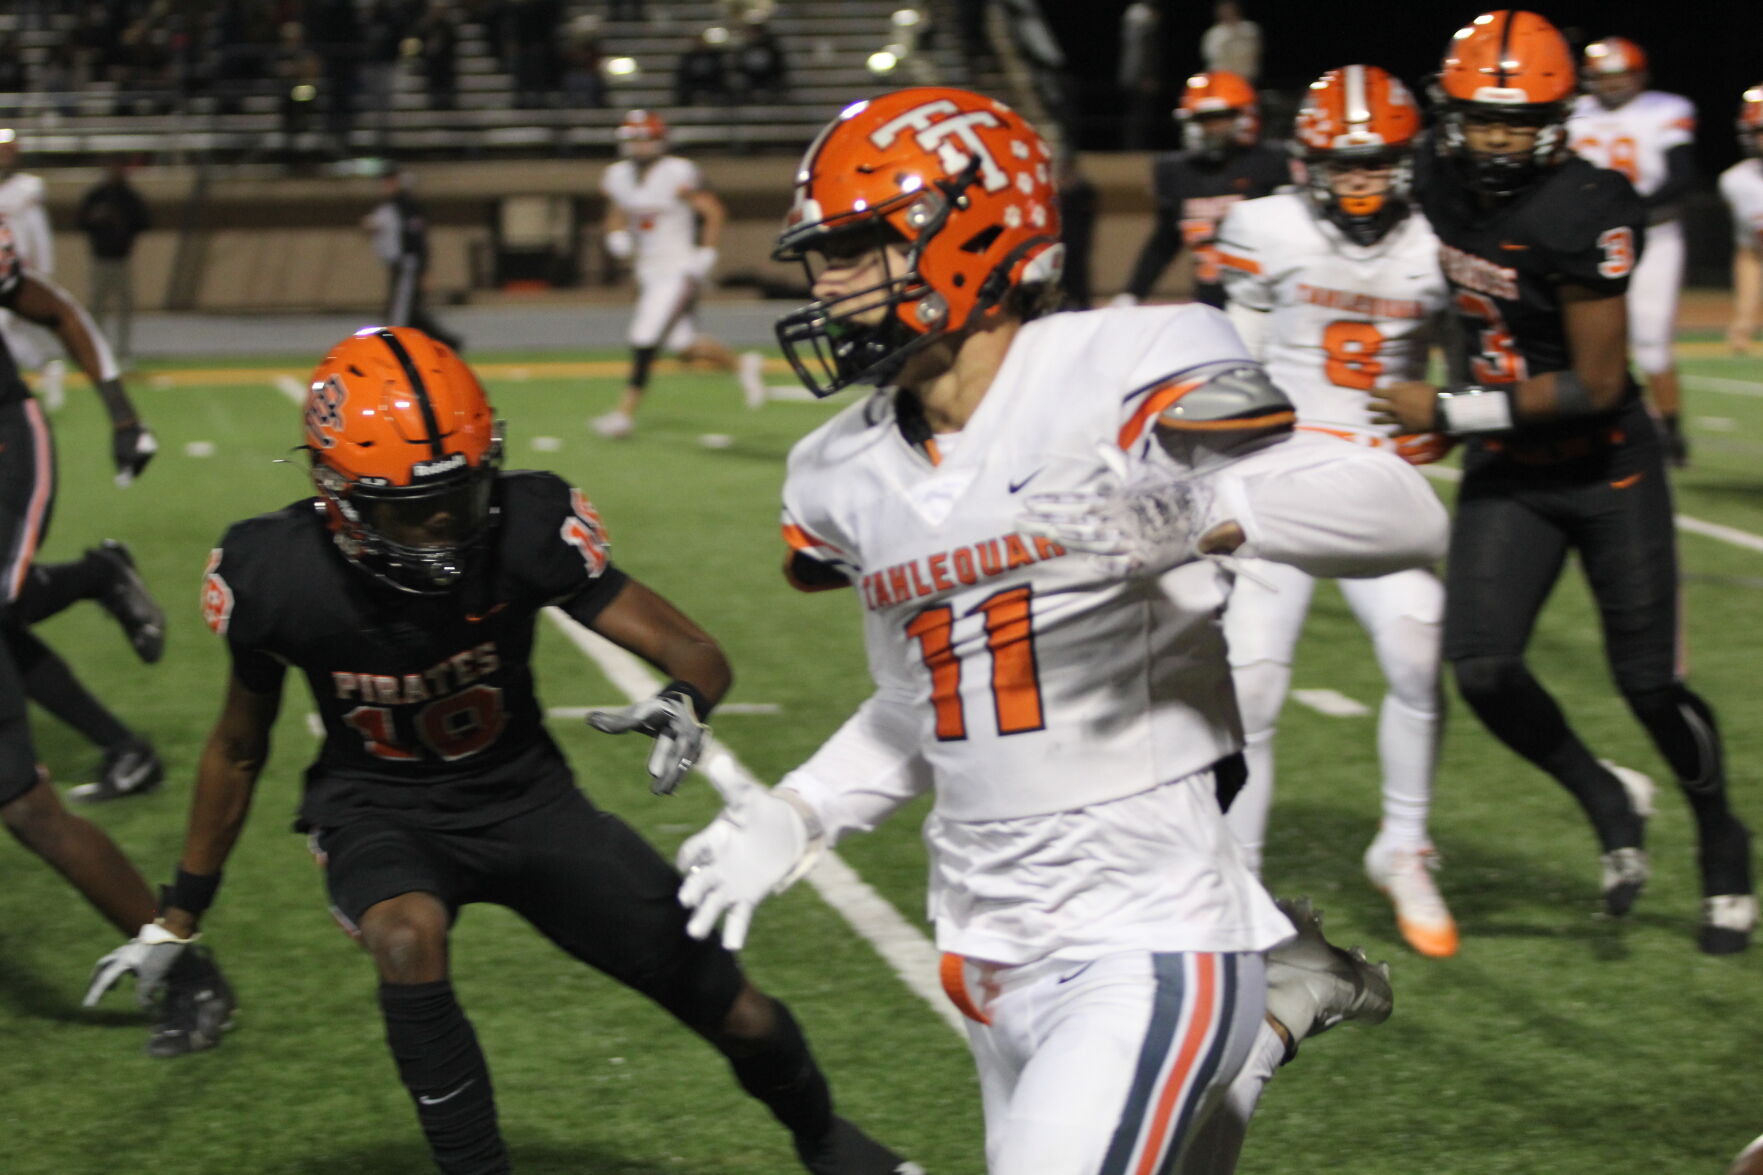 Tigers dropped by Pirates in first round of playoffs 41-21